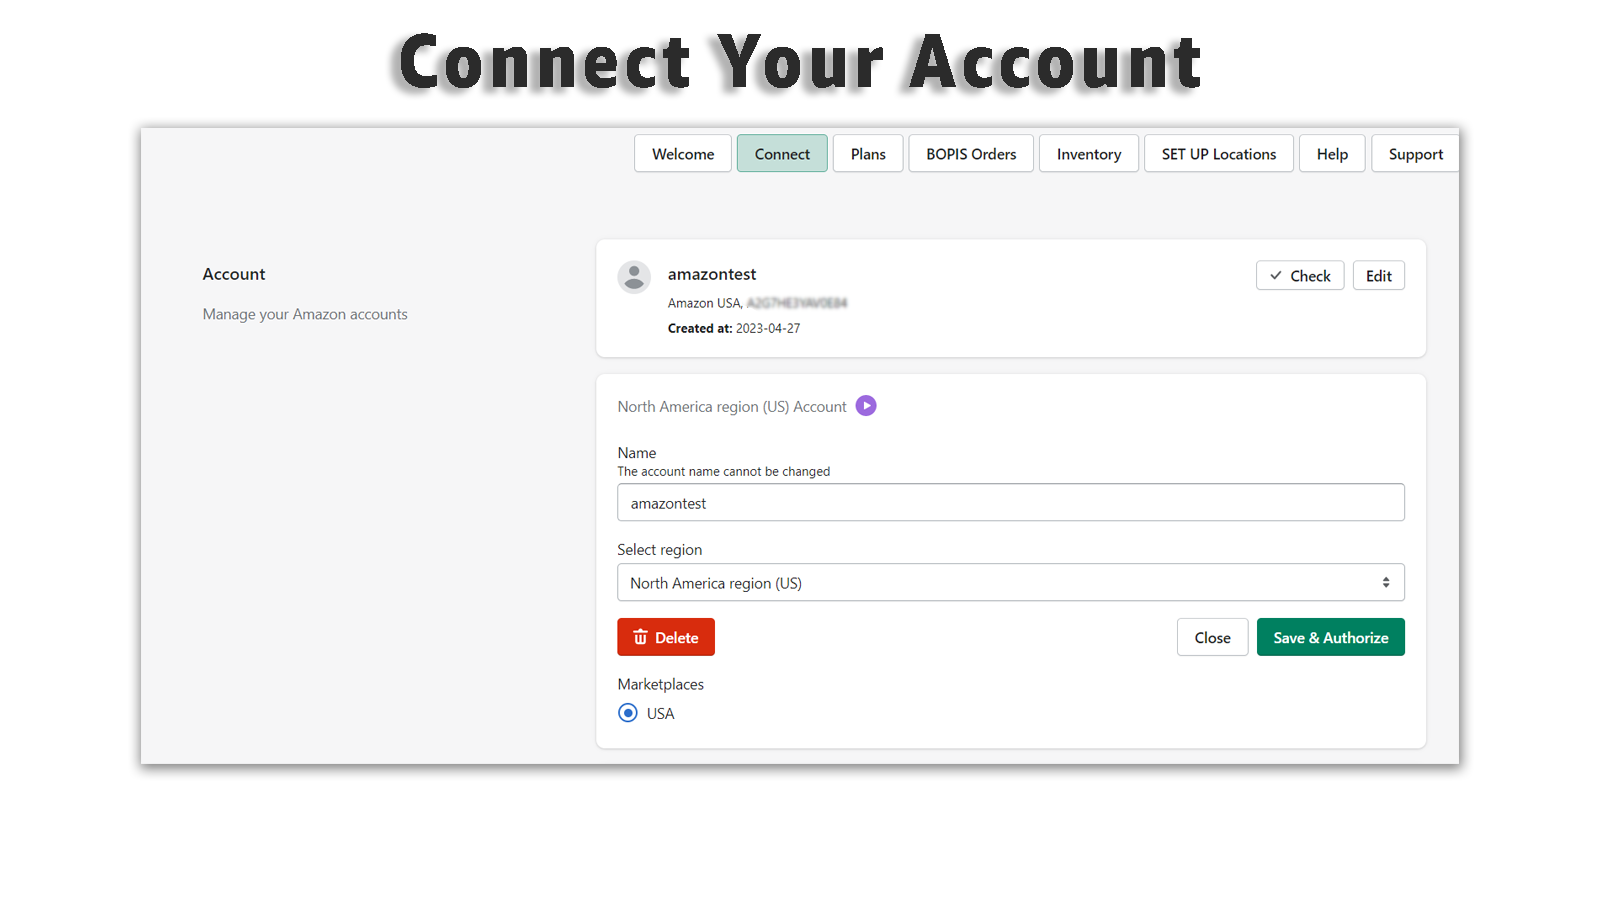 Connect your account